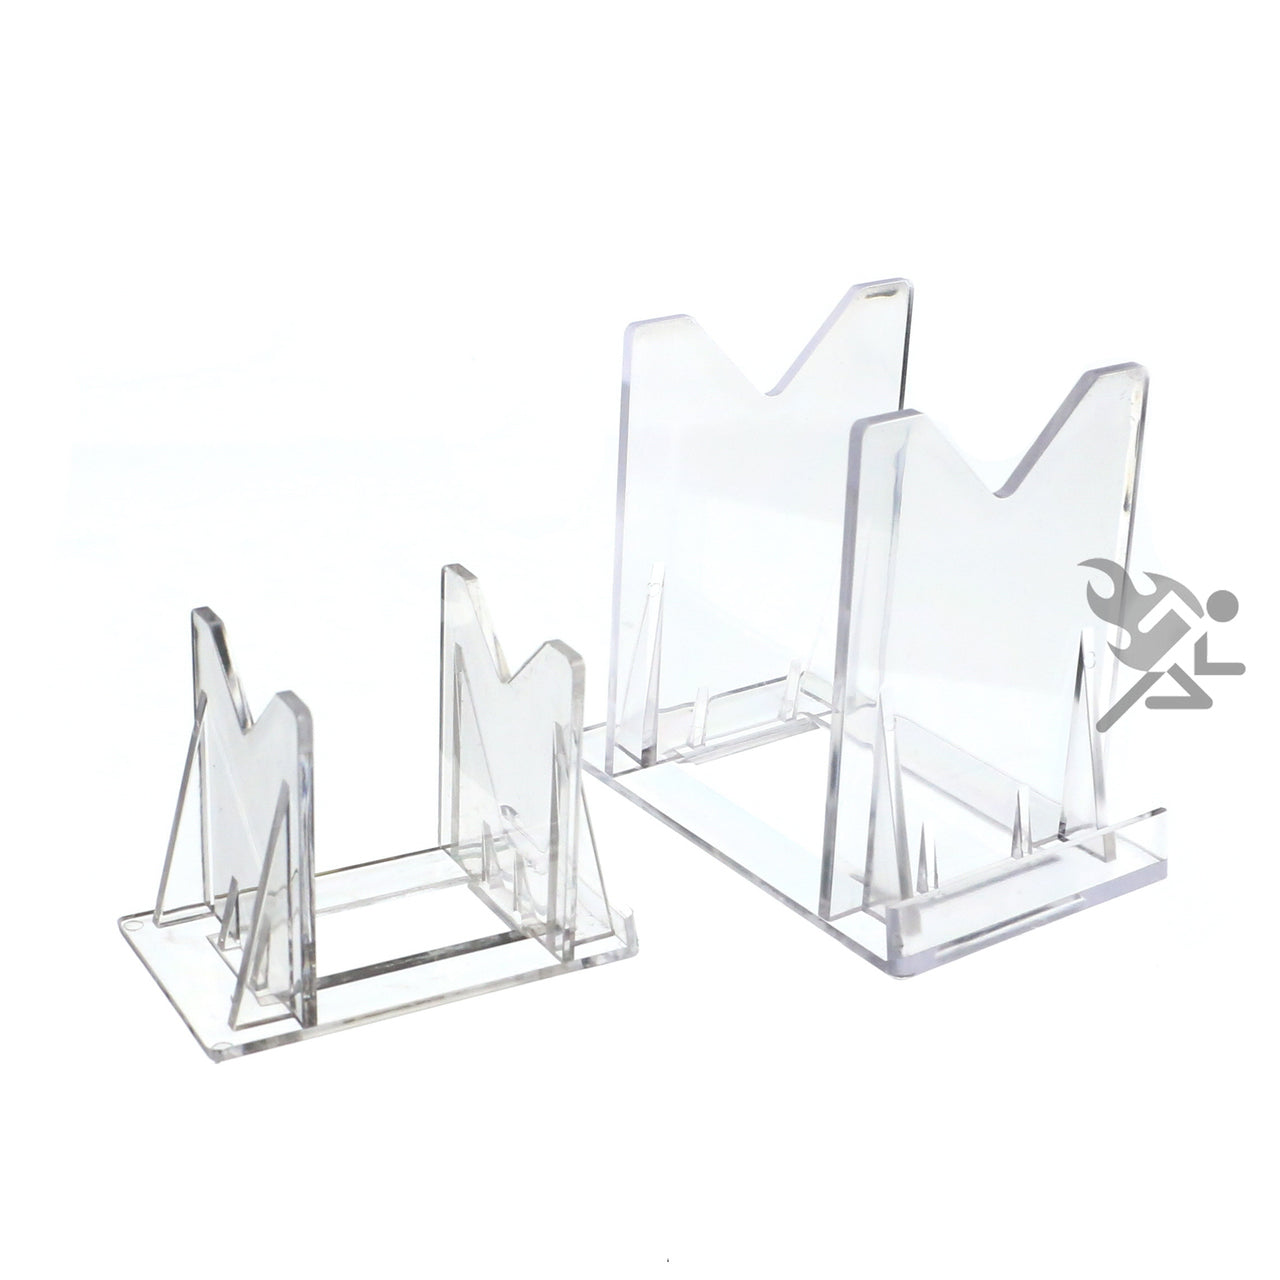 SHAVERUSH Fishing Lure Display, Fishing Lure Display Stand, Fishing Lure  Display With Holder, 4pcs Shelf Holder, Decorative Fishing Lures Kit  Accessories Storage Decoration For Baits Lure Display : :  Sports & Outdoors